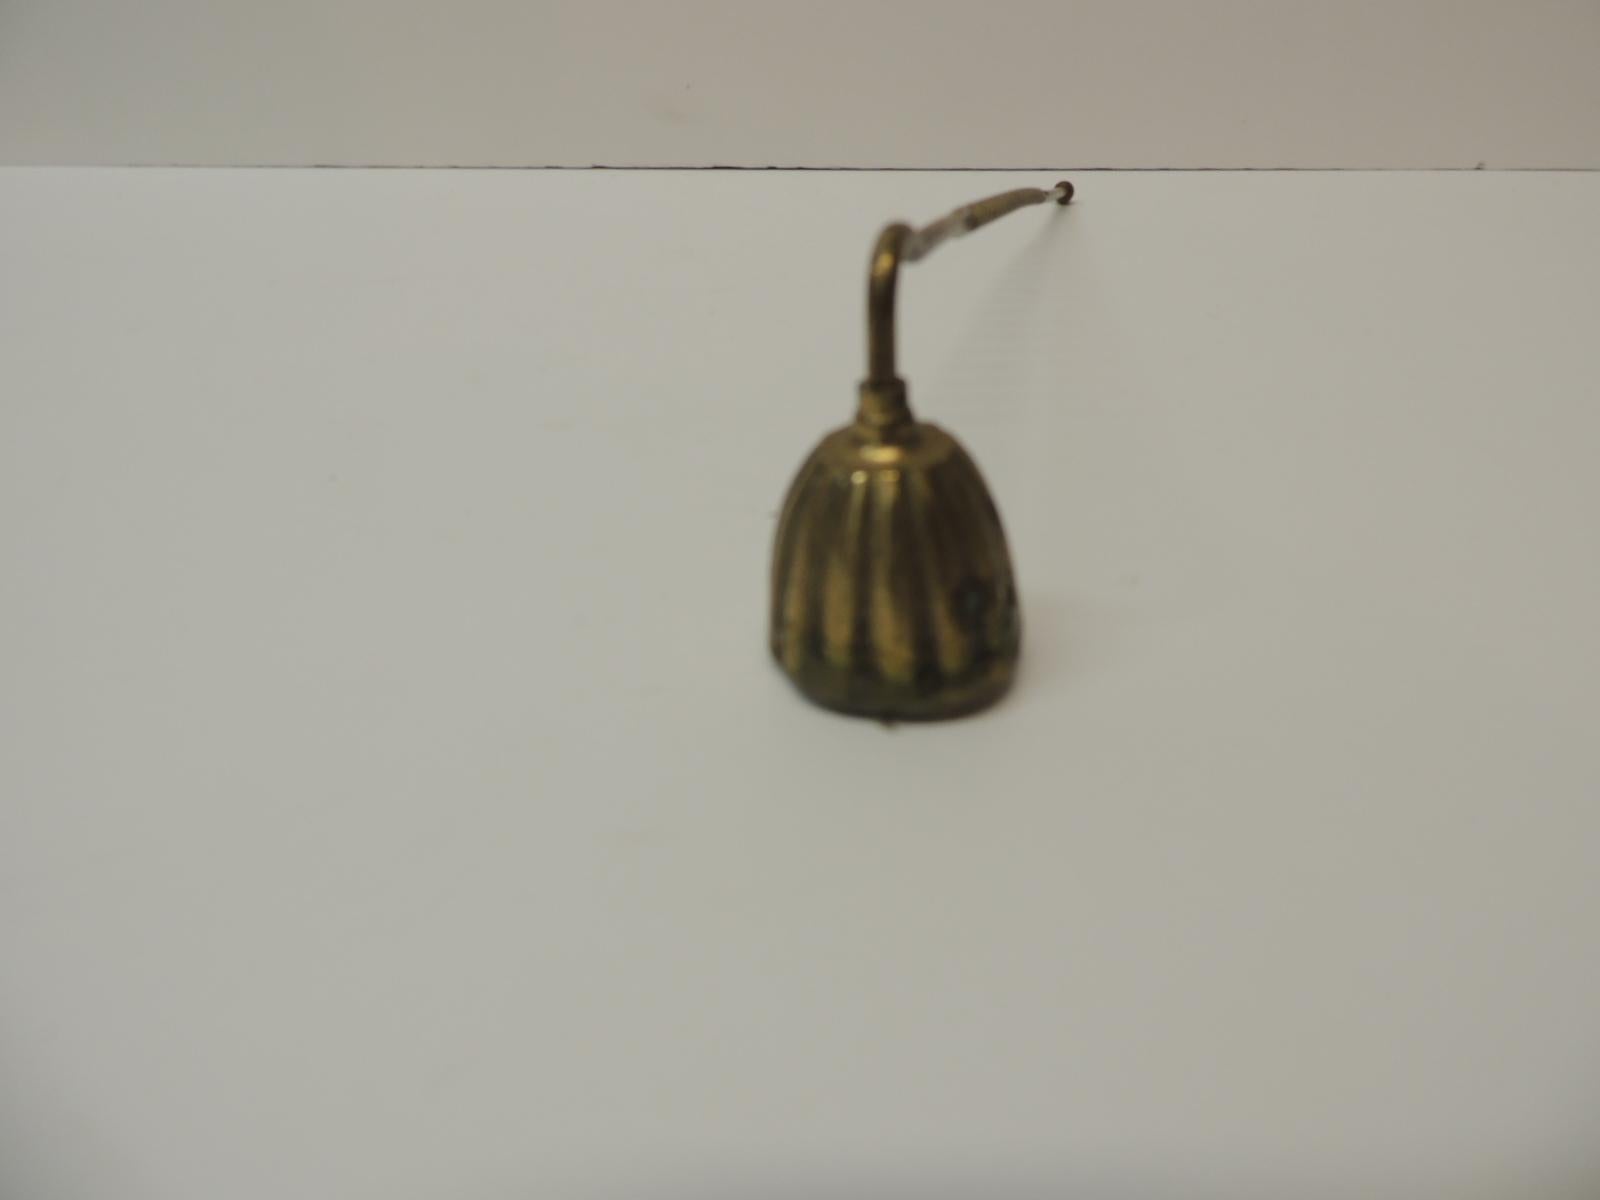 Vintage brass candle snuffer with twisted handle details
The snuffer is in the shape of a bell
Size: 12